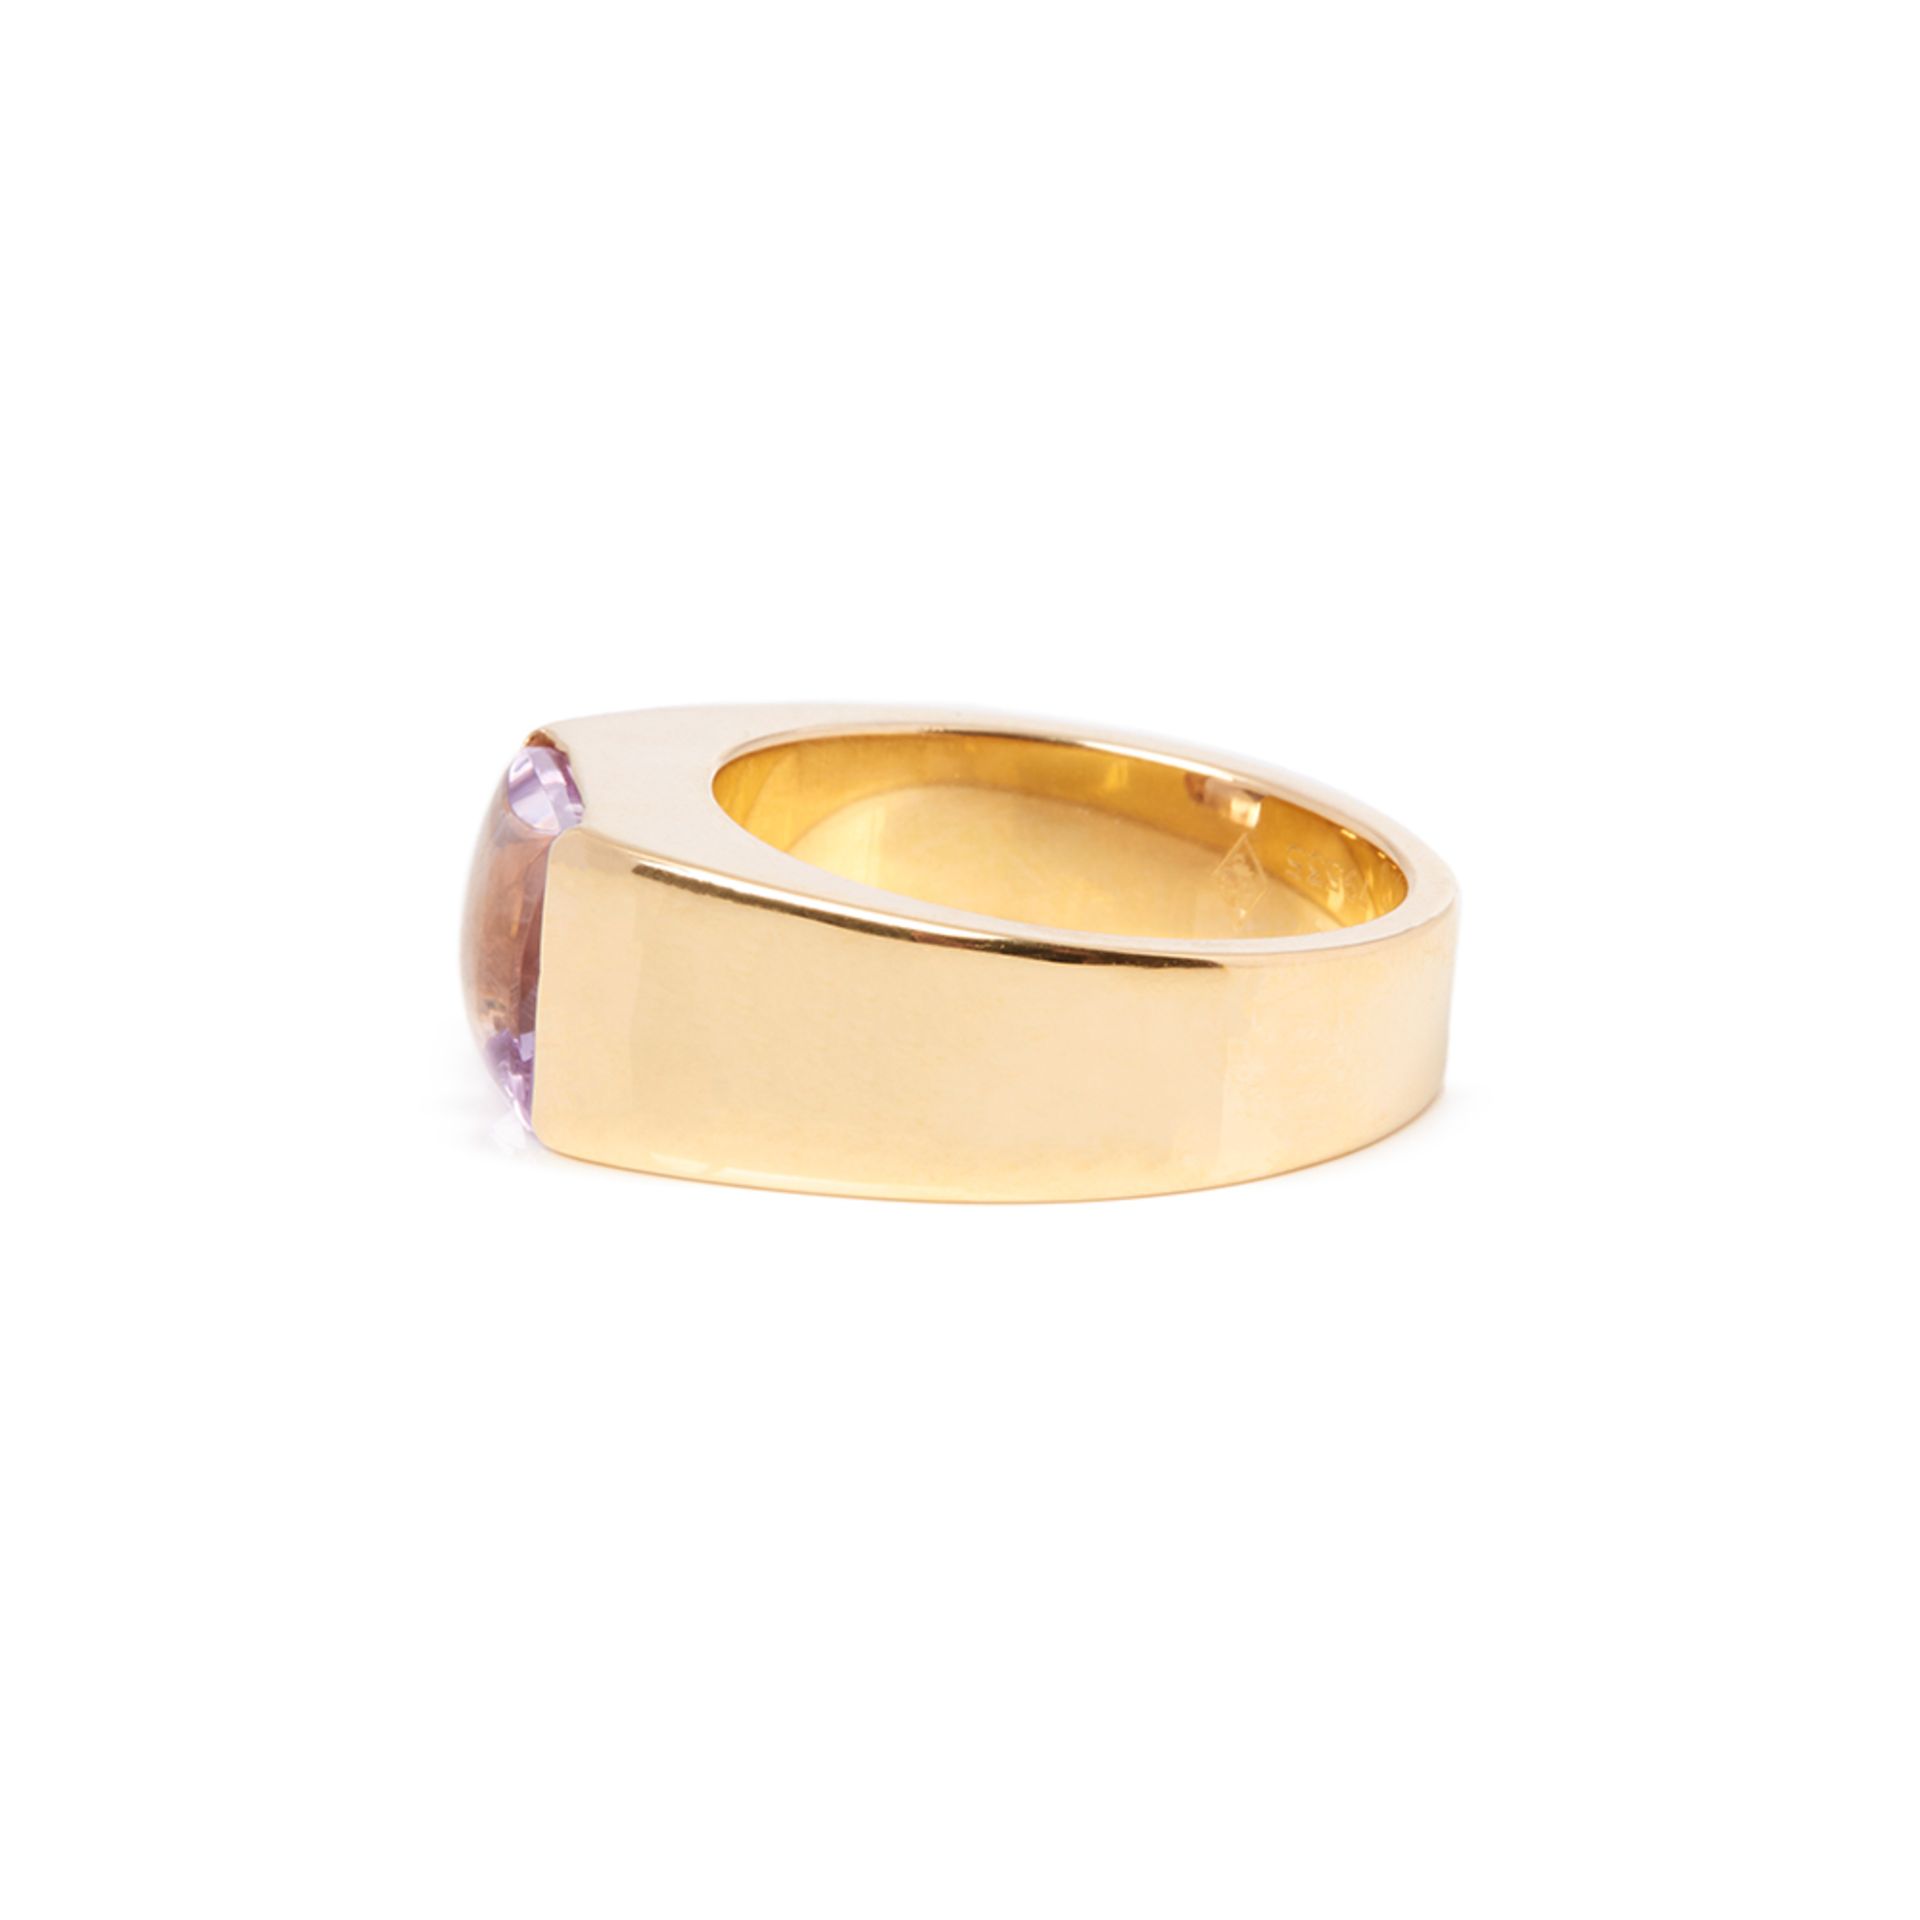 Cartier 18k Yellow Gold Amethyst Tank Ring - Image 3 of 6